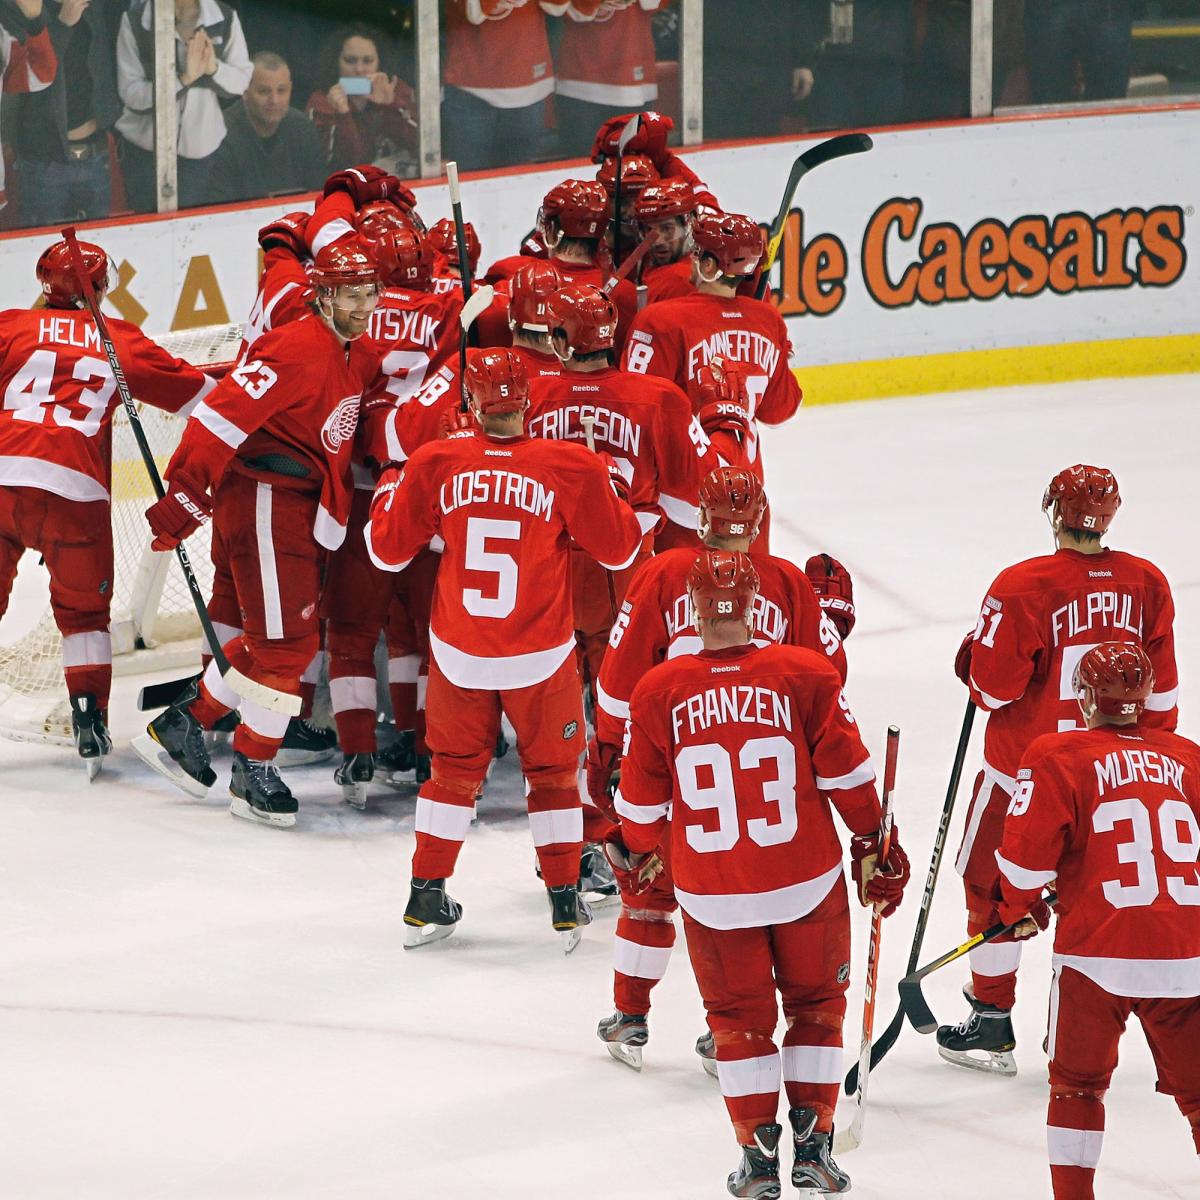 Detroit Red Wings Does the Home Winning Streak Need an Asterisk